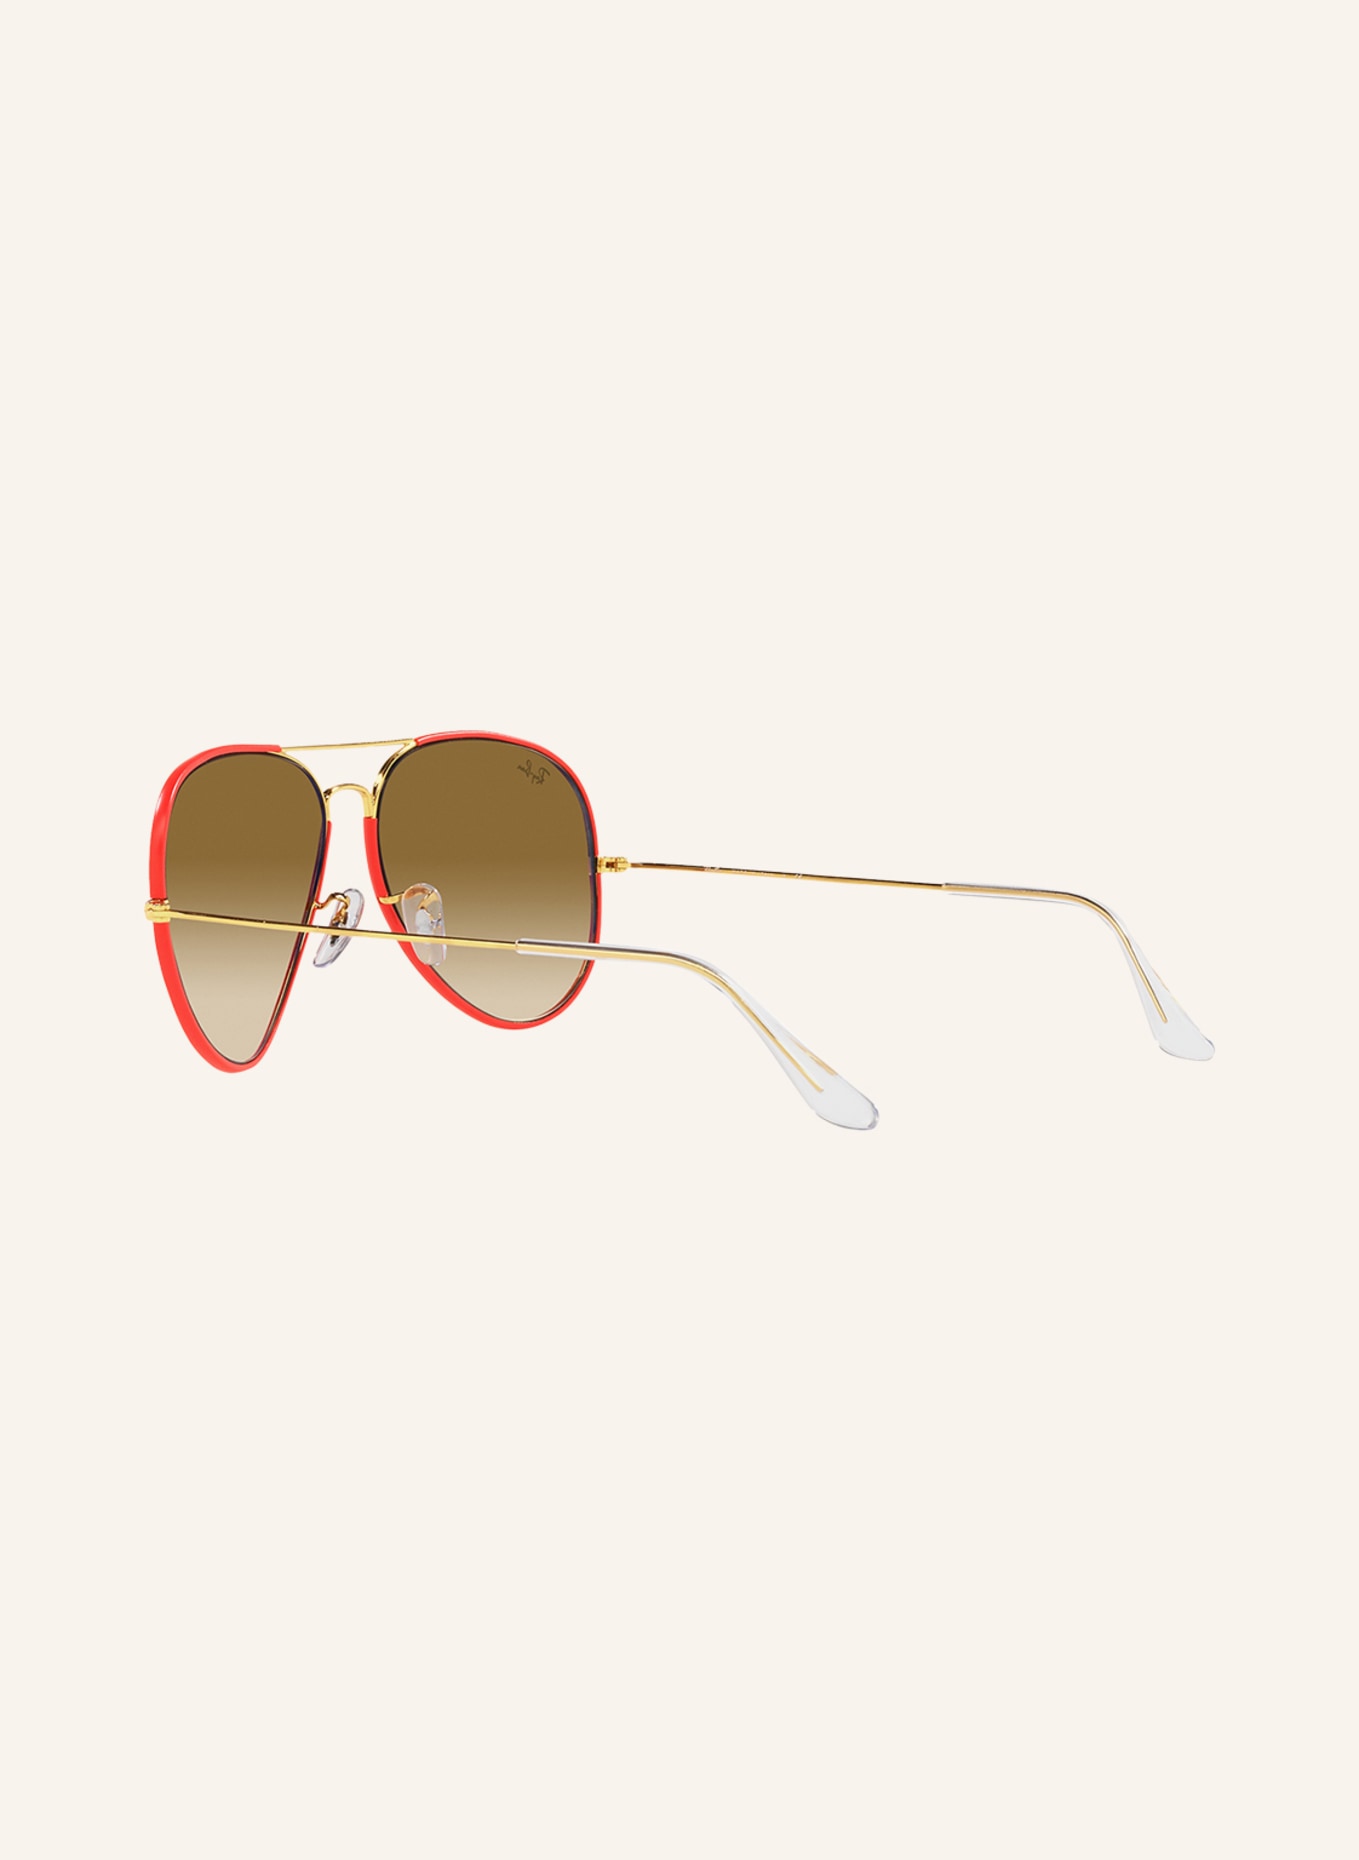 Ray-Ban Sunglasses RB3025, Color: 919651 - RED/BROWN GRADIENT (Image 4)